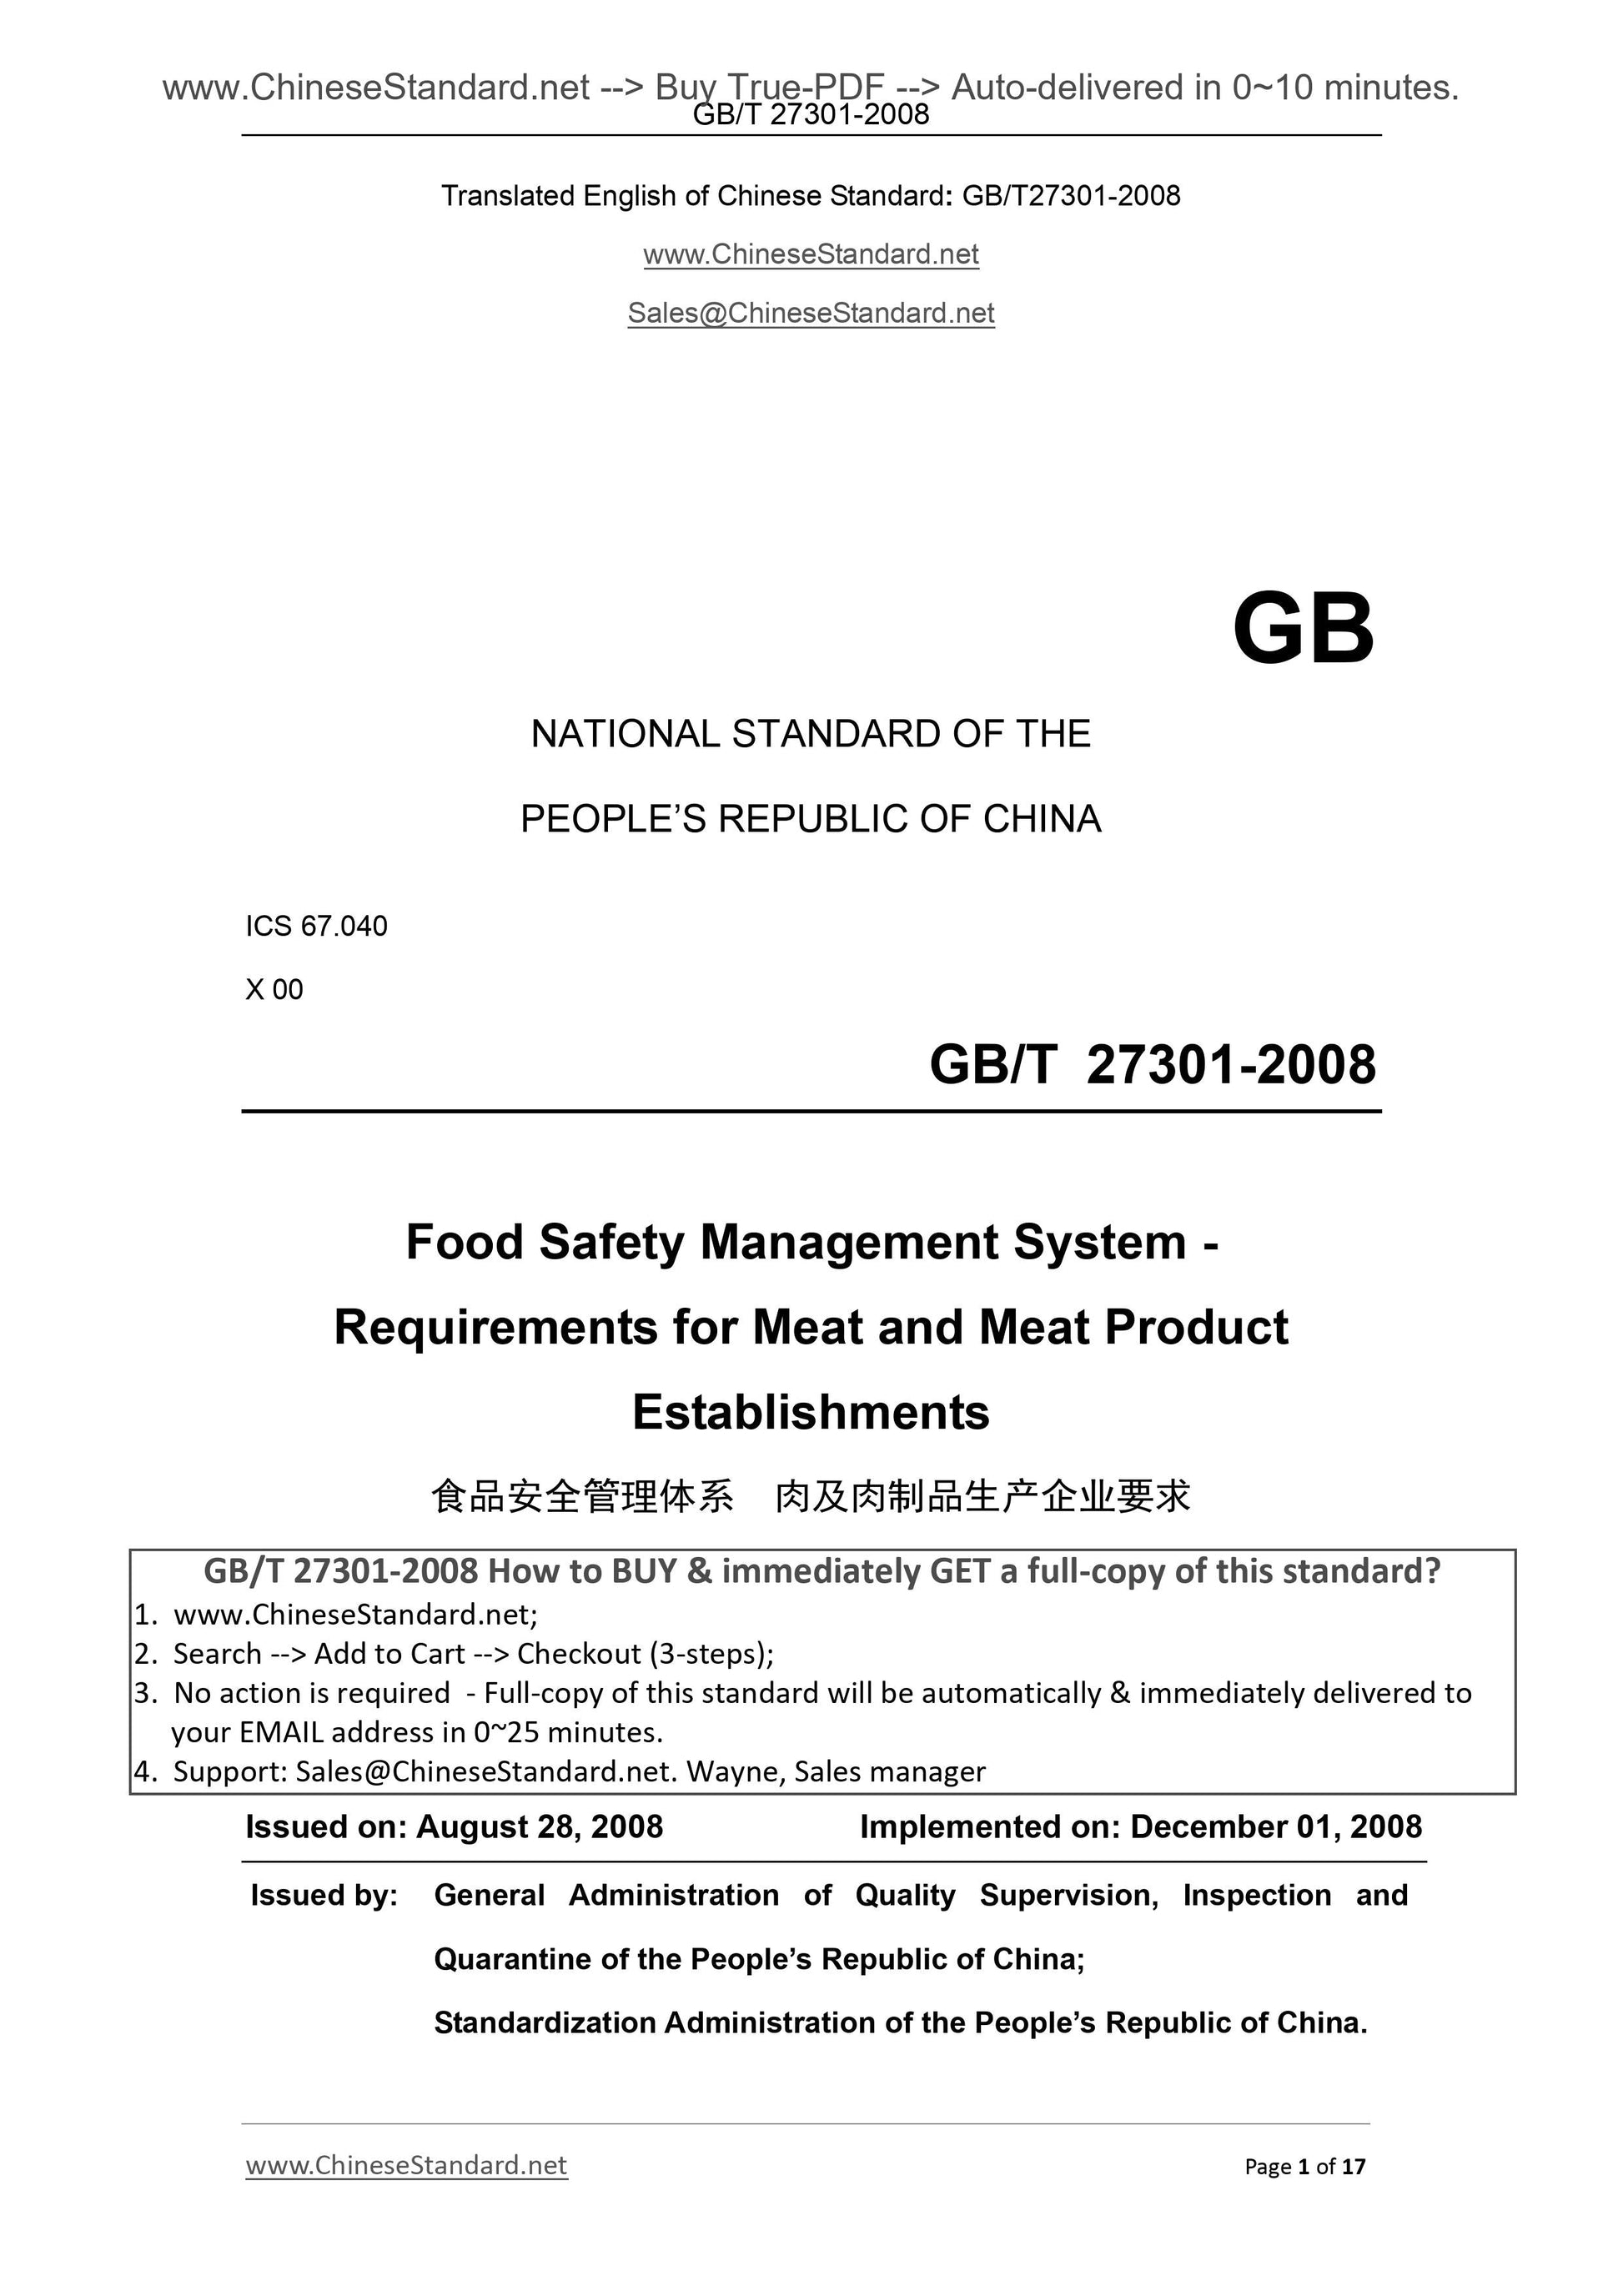 GB/T 27301-2008 Page 1